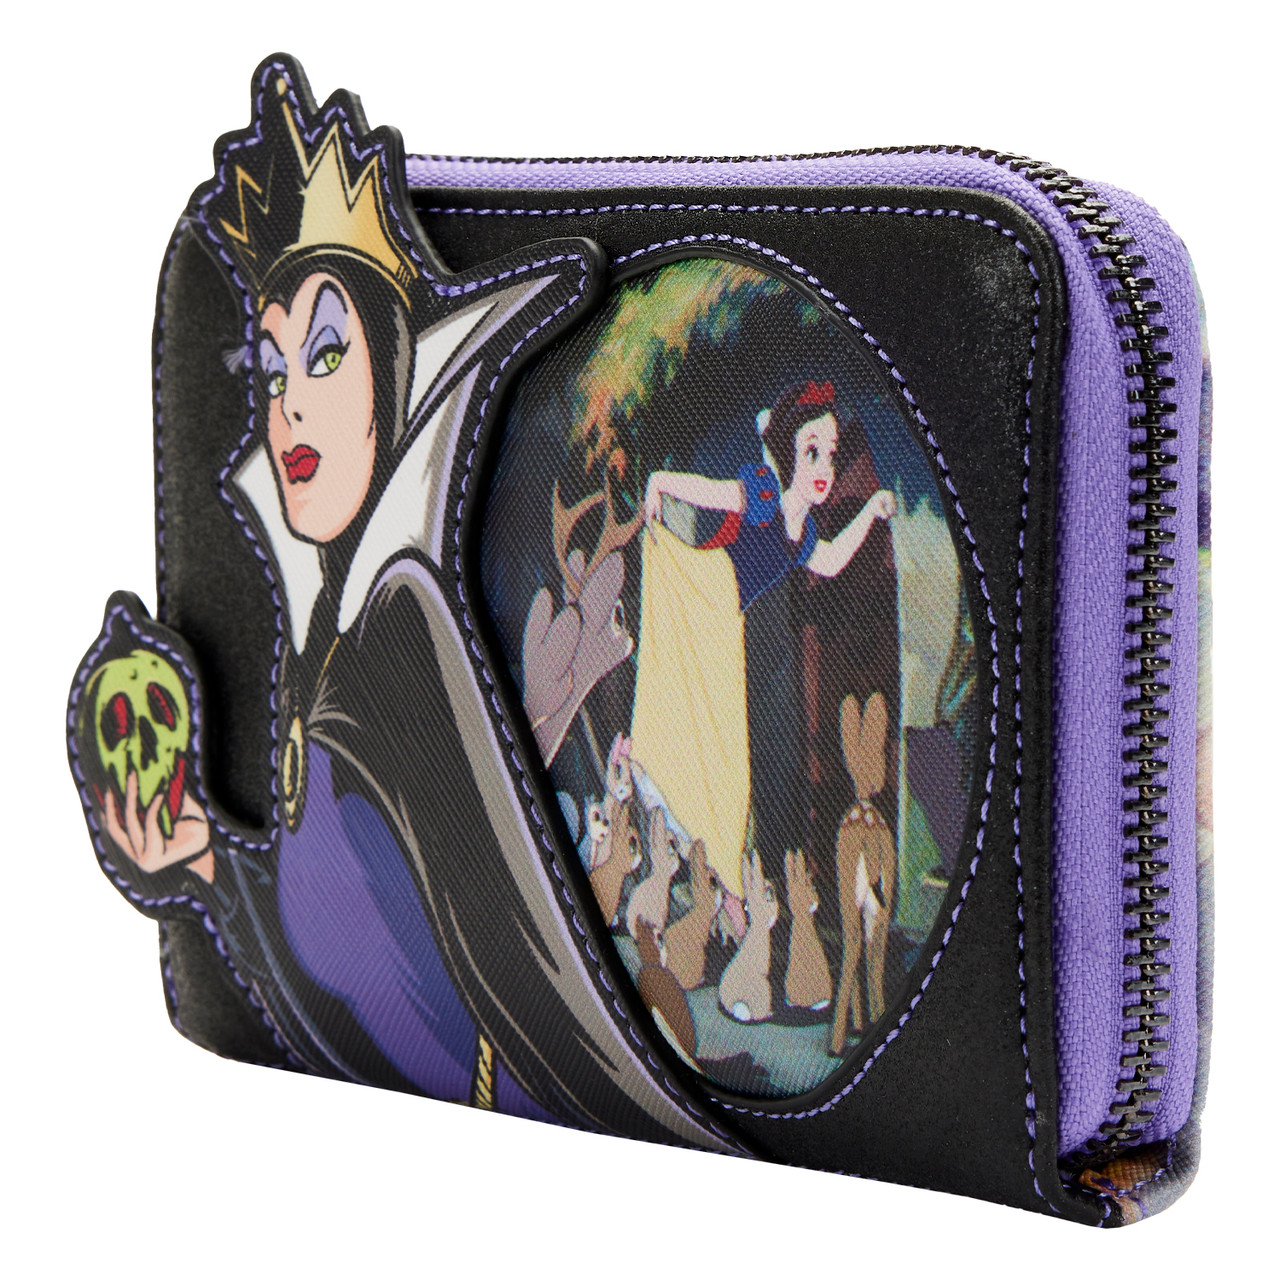 Loungefly Disney Villains Classic All Over Print Faux Leather